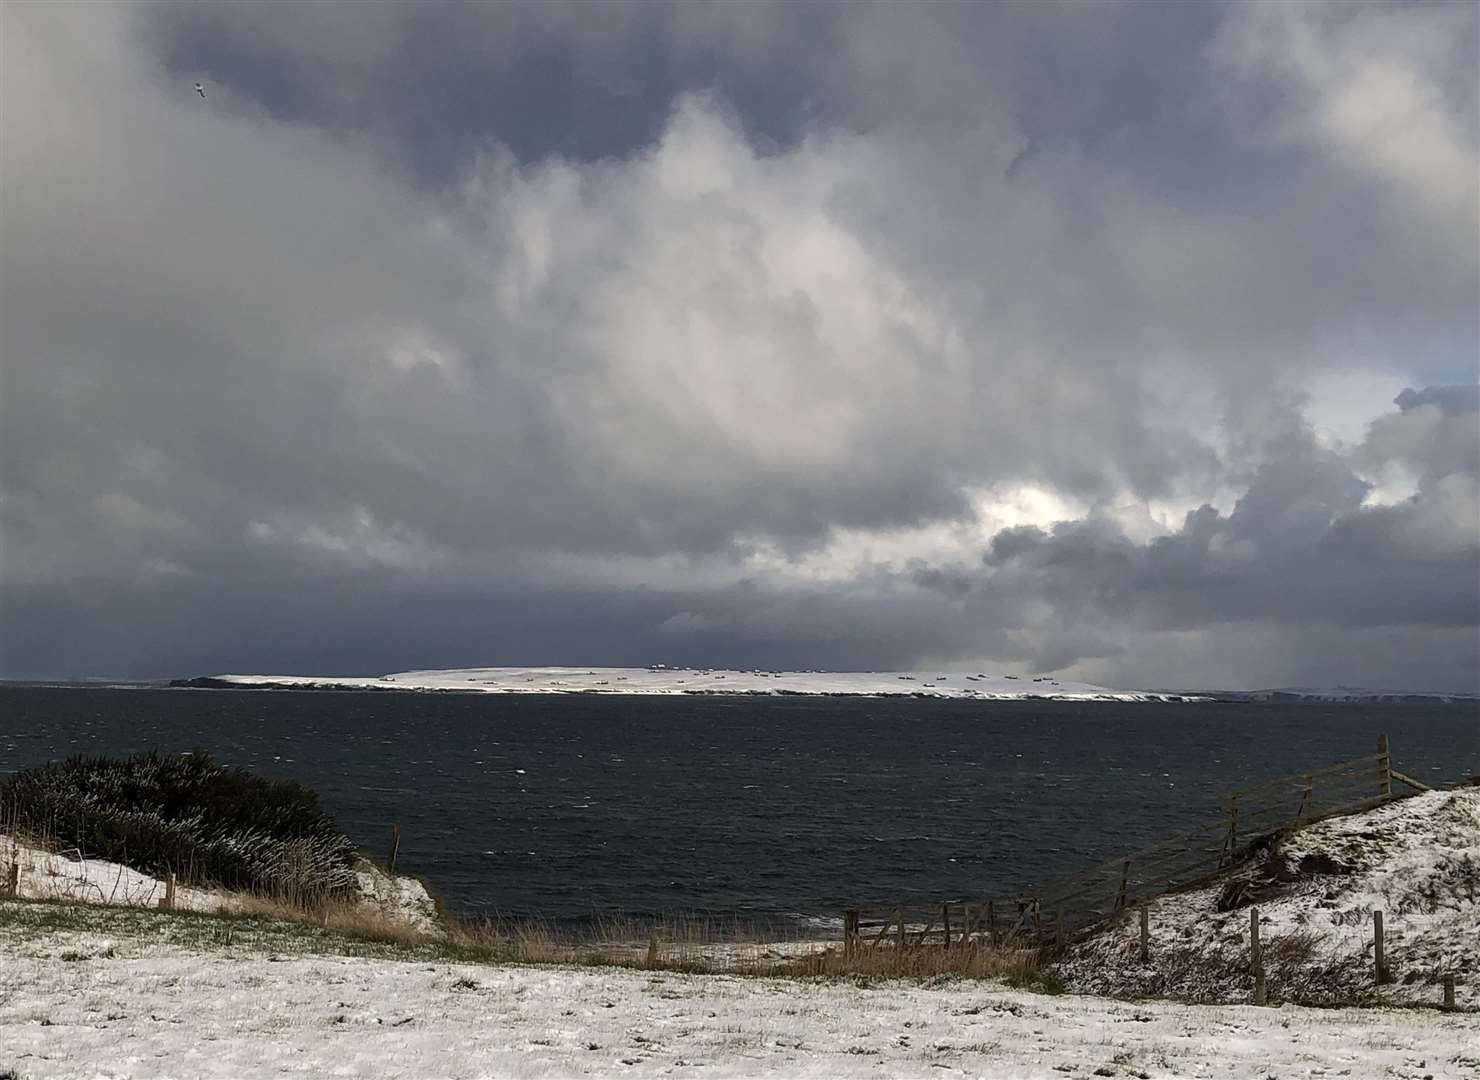 Lyall Rennie captured this dramatic photo of 'spring time' on Stroma.